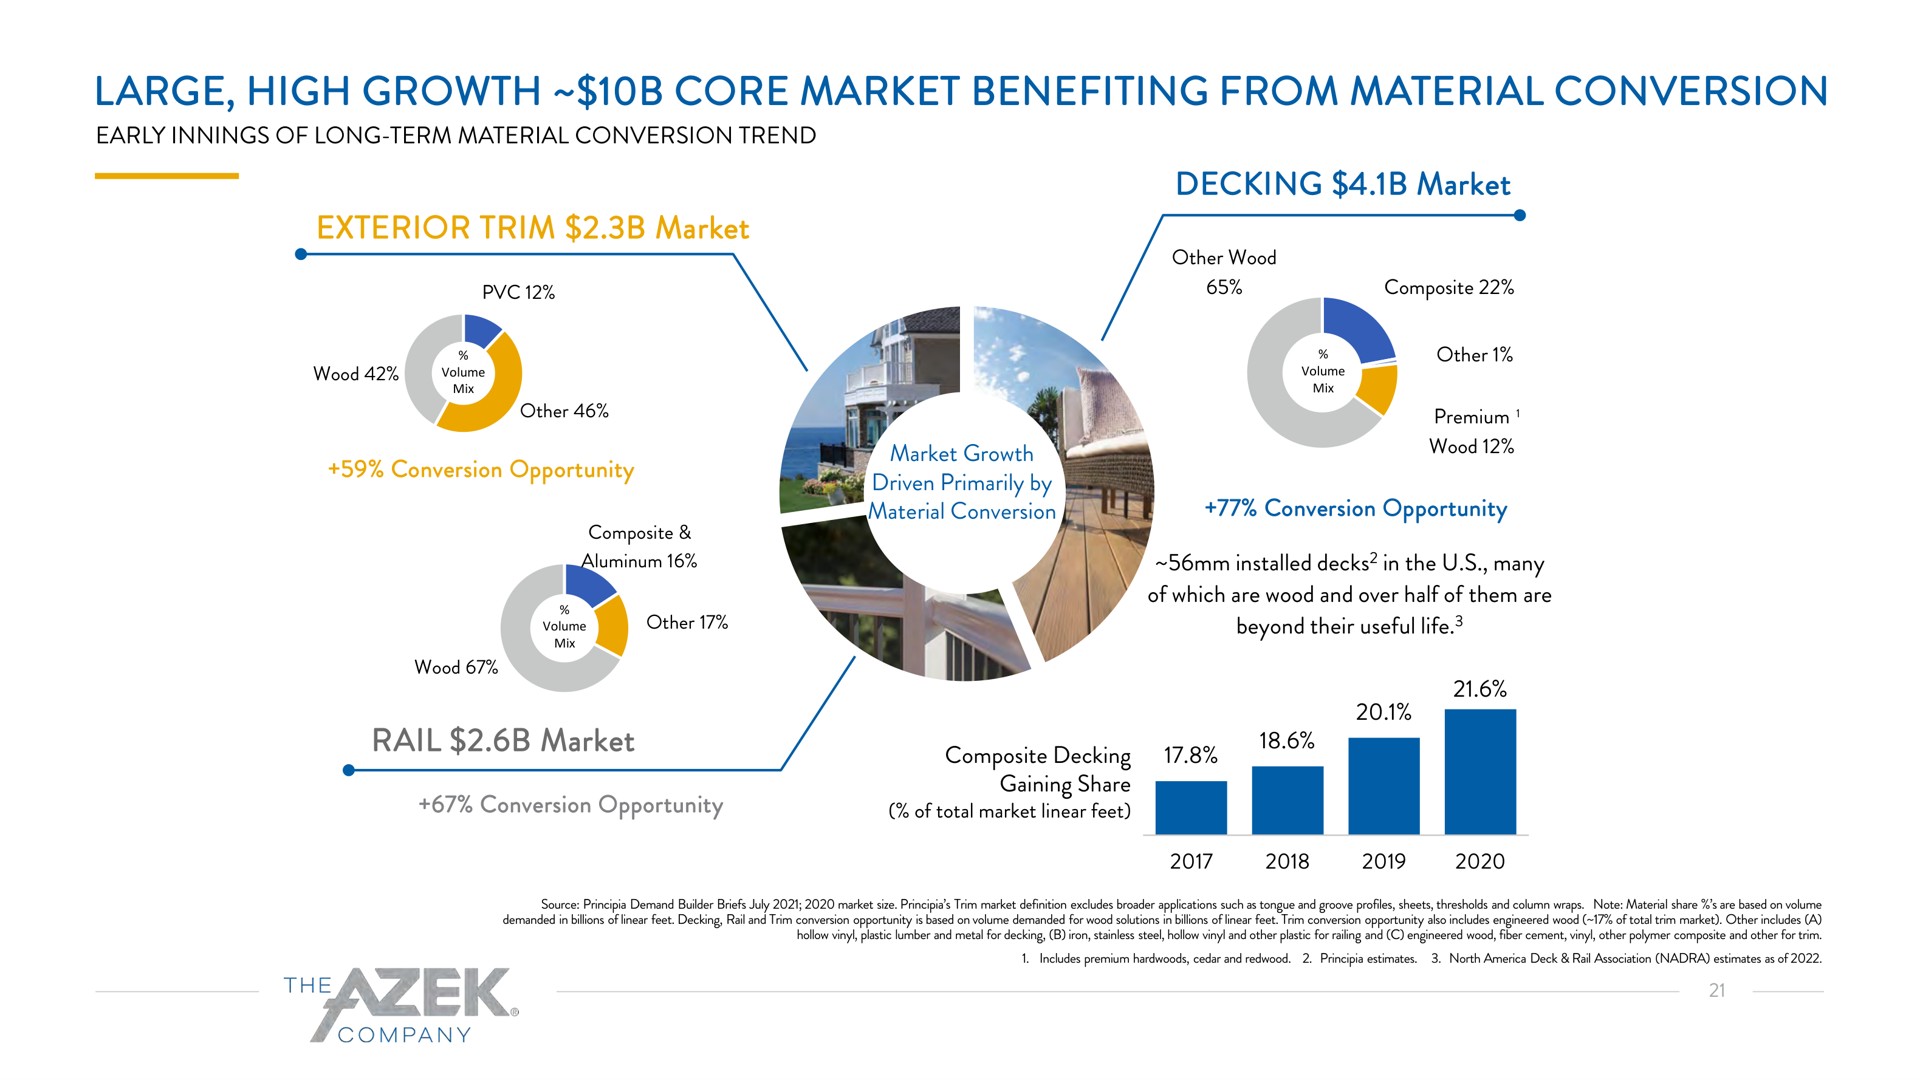 large high growth core market benefiting from material conversion exterior trim market decking market rail market | Azek